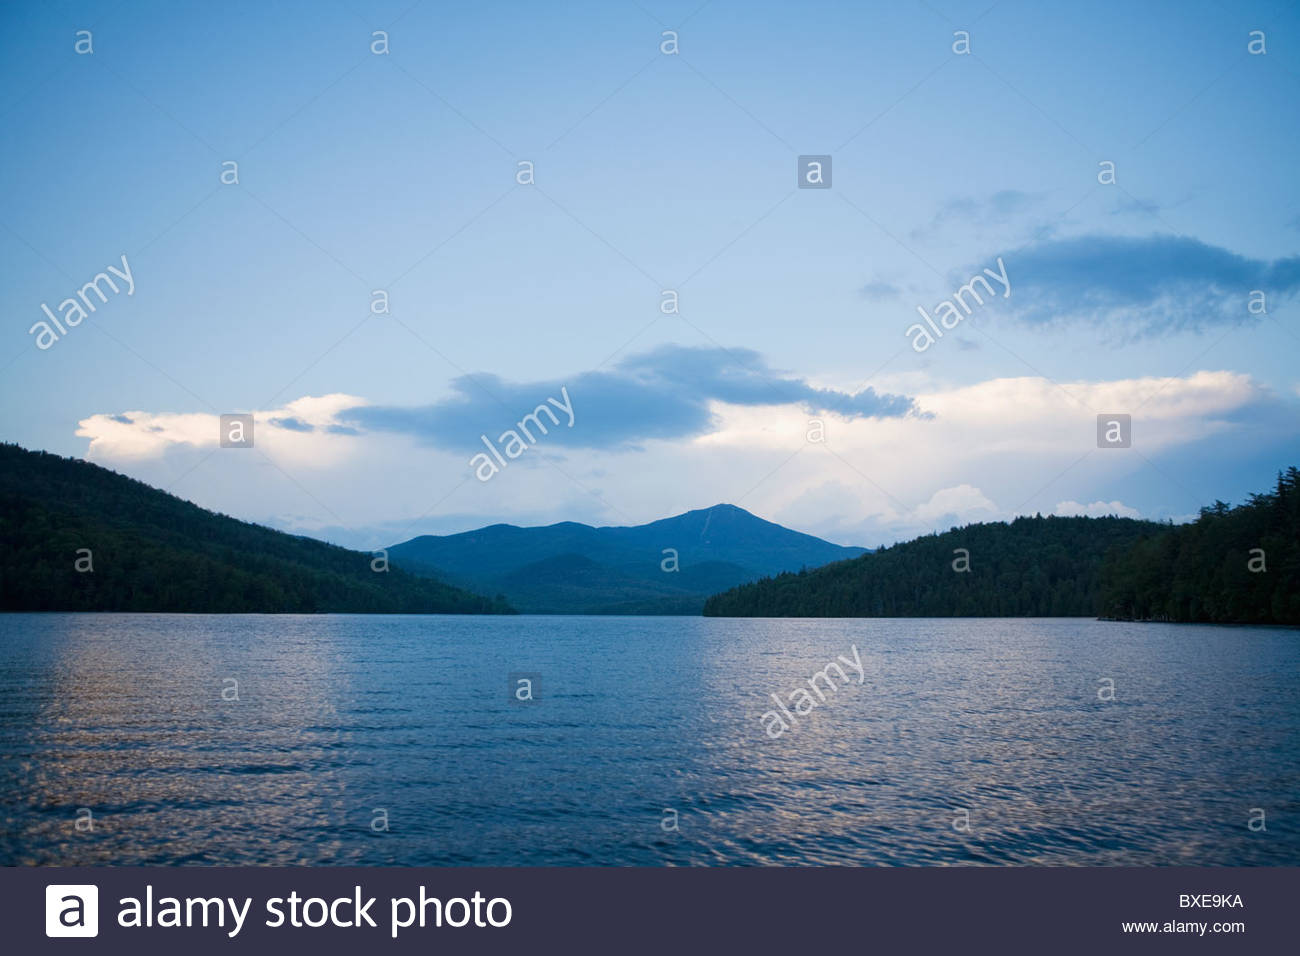 Lake Placid With Whiteface Mountain In Background Stock Photo